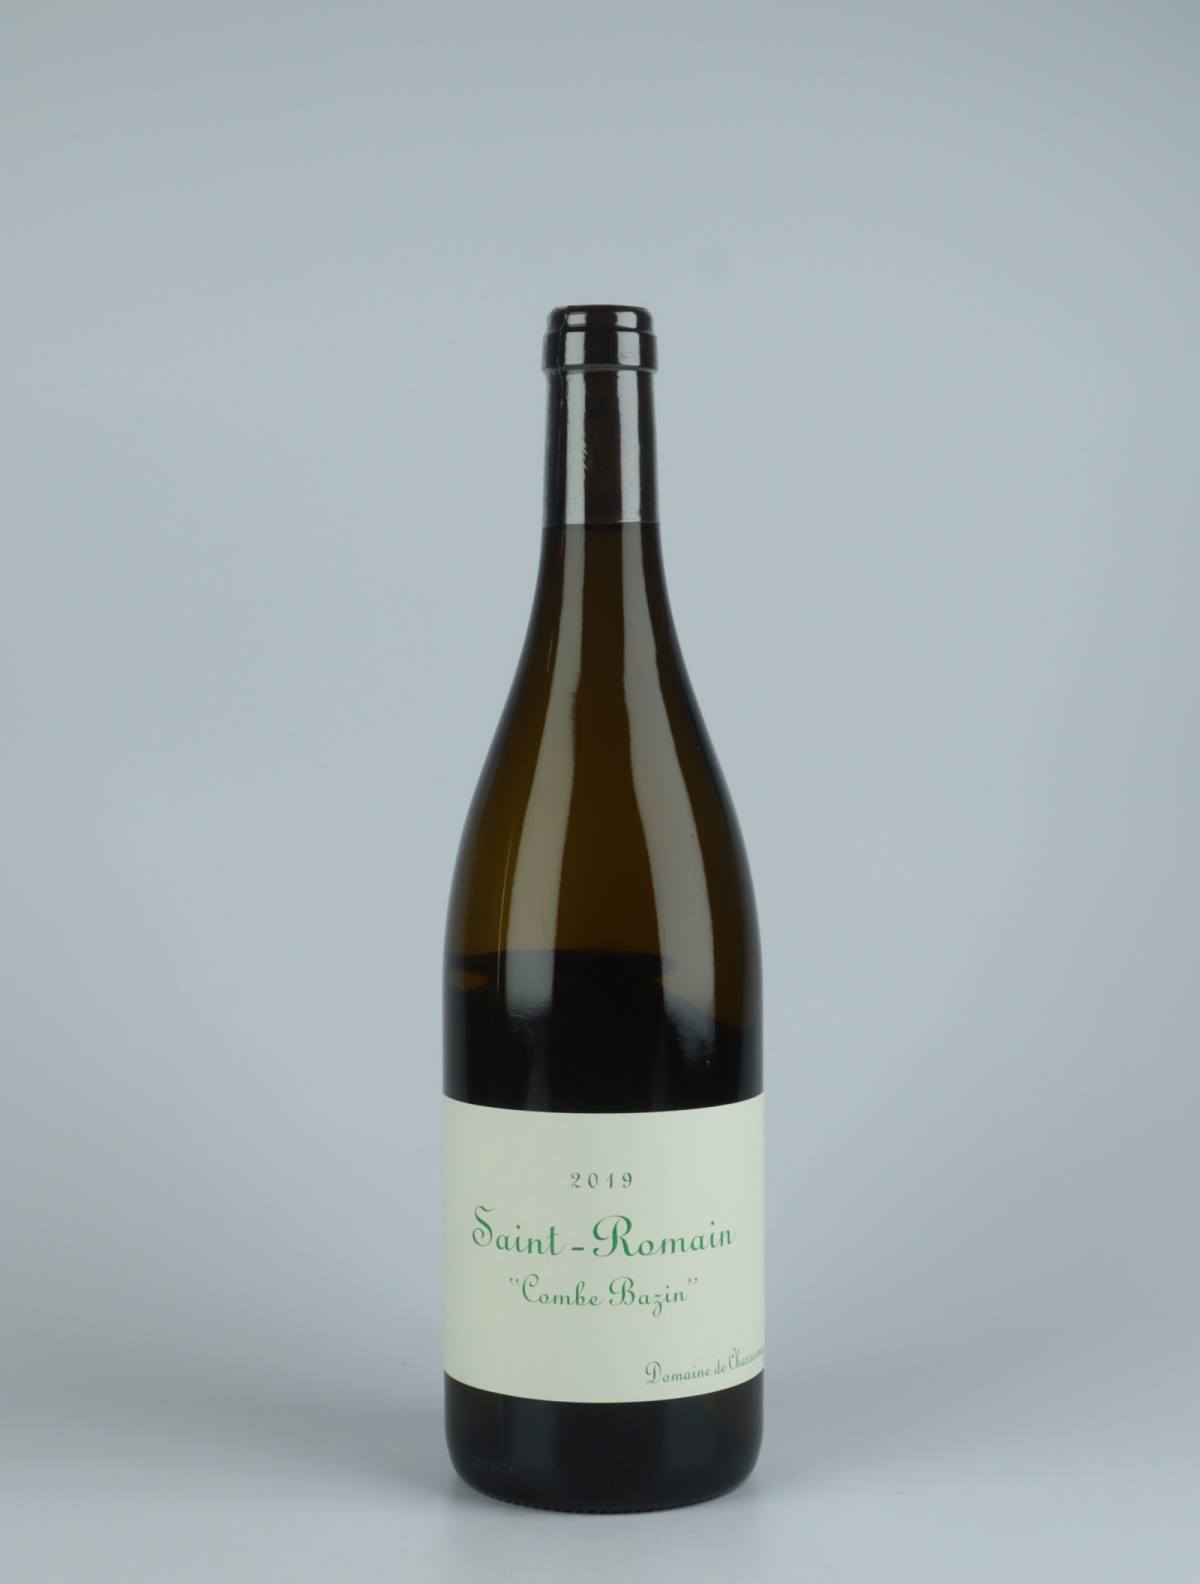 A bottle 2019 Saint Romain Blanc - Combe Bazin - Qvevris White wine from Domaine de Chassorney, Burgundy in France